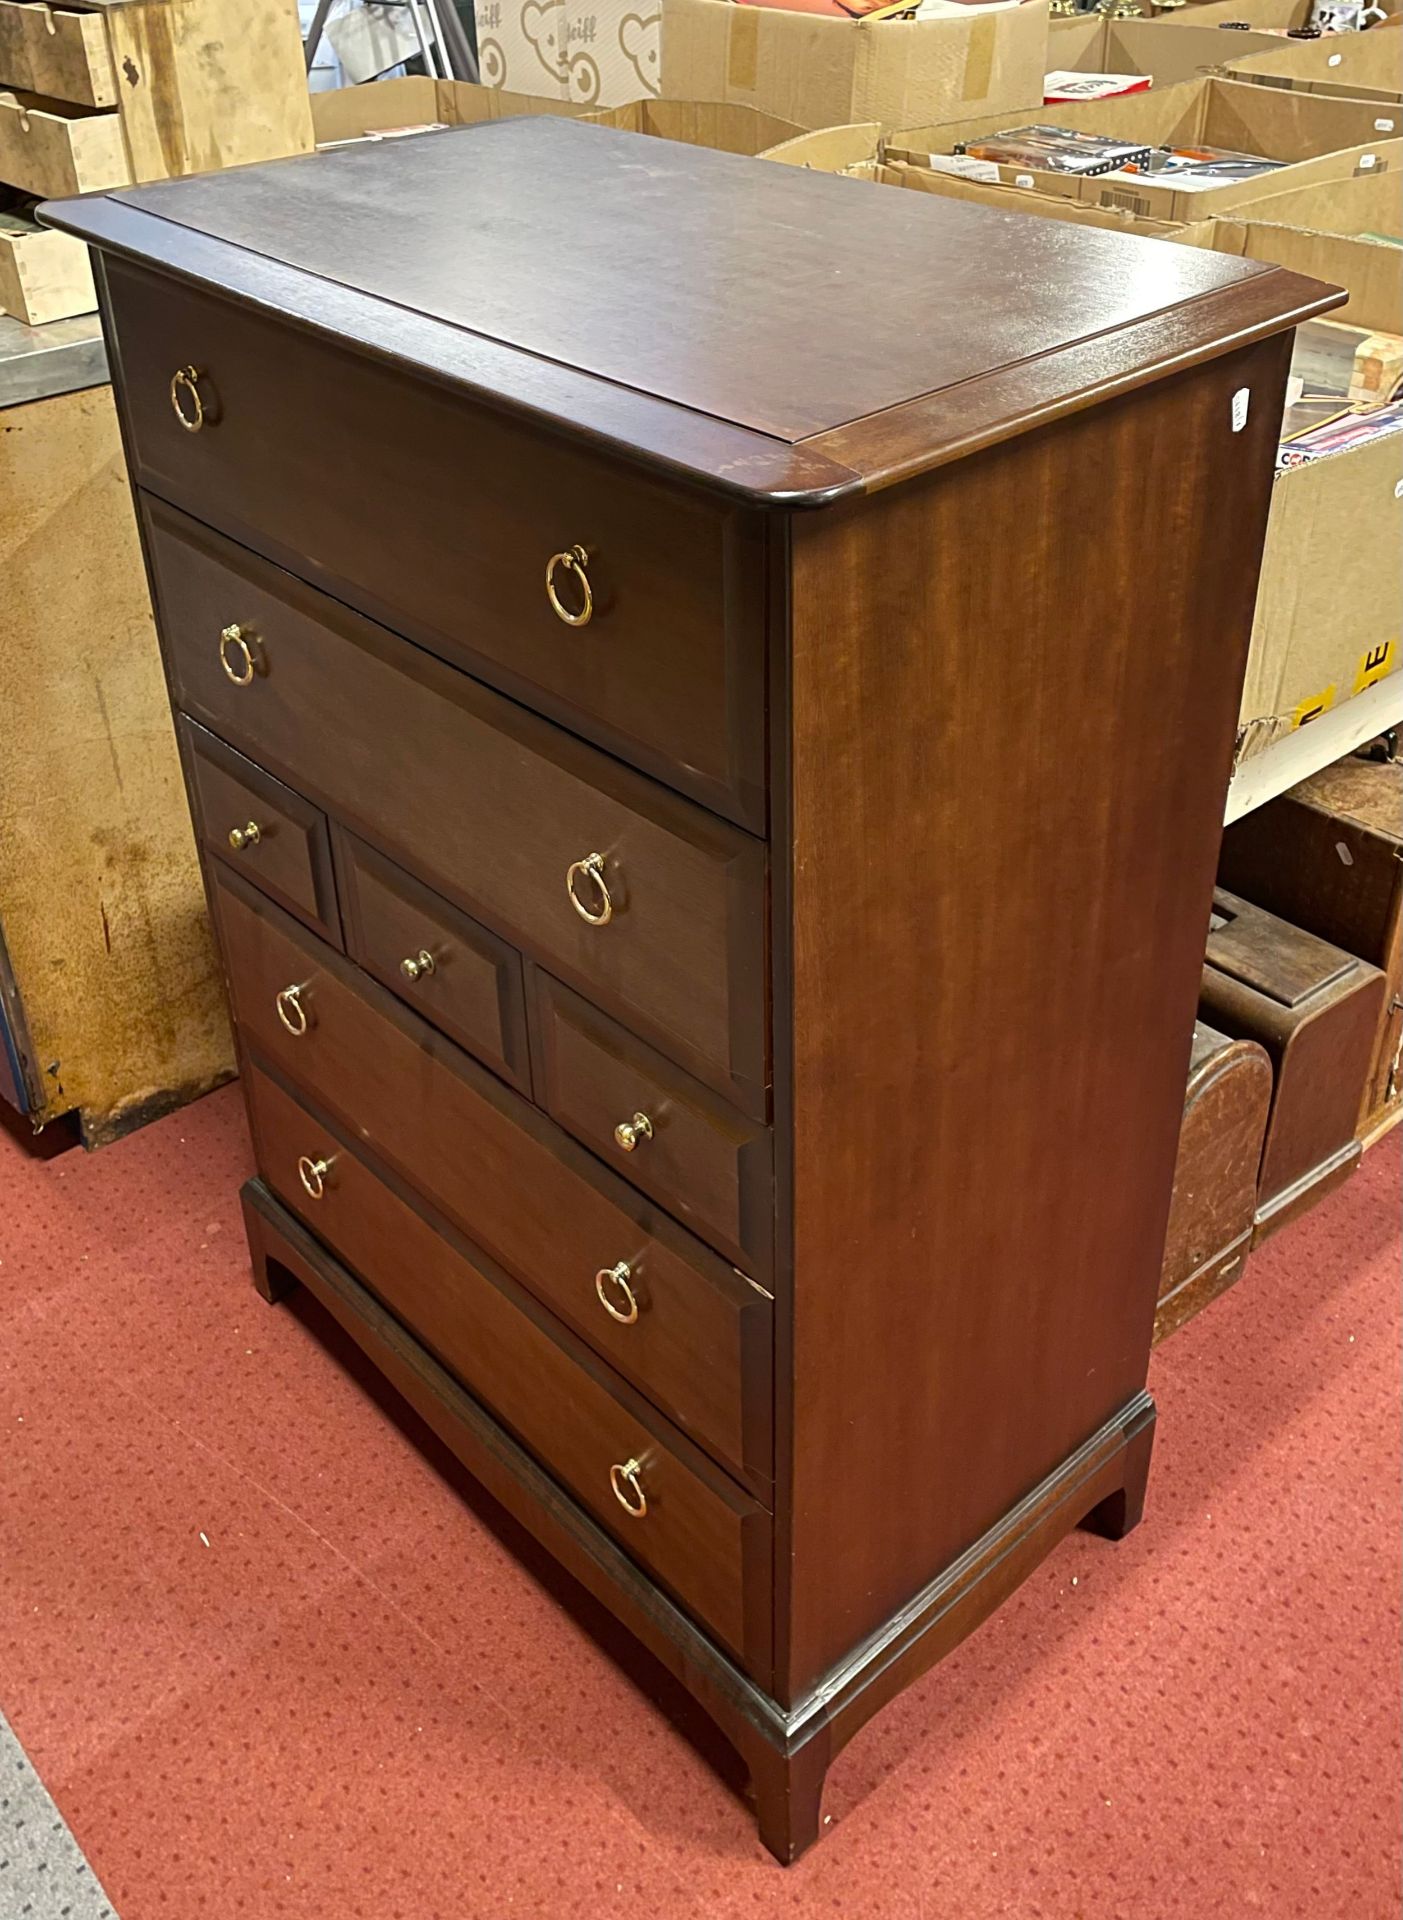 A Stag Minstrel tallboy/chest of drawers, having three small central drawers with two deep drawers